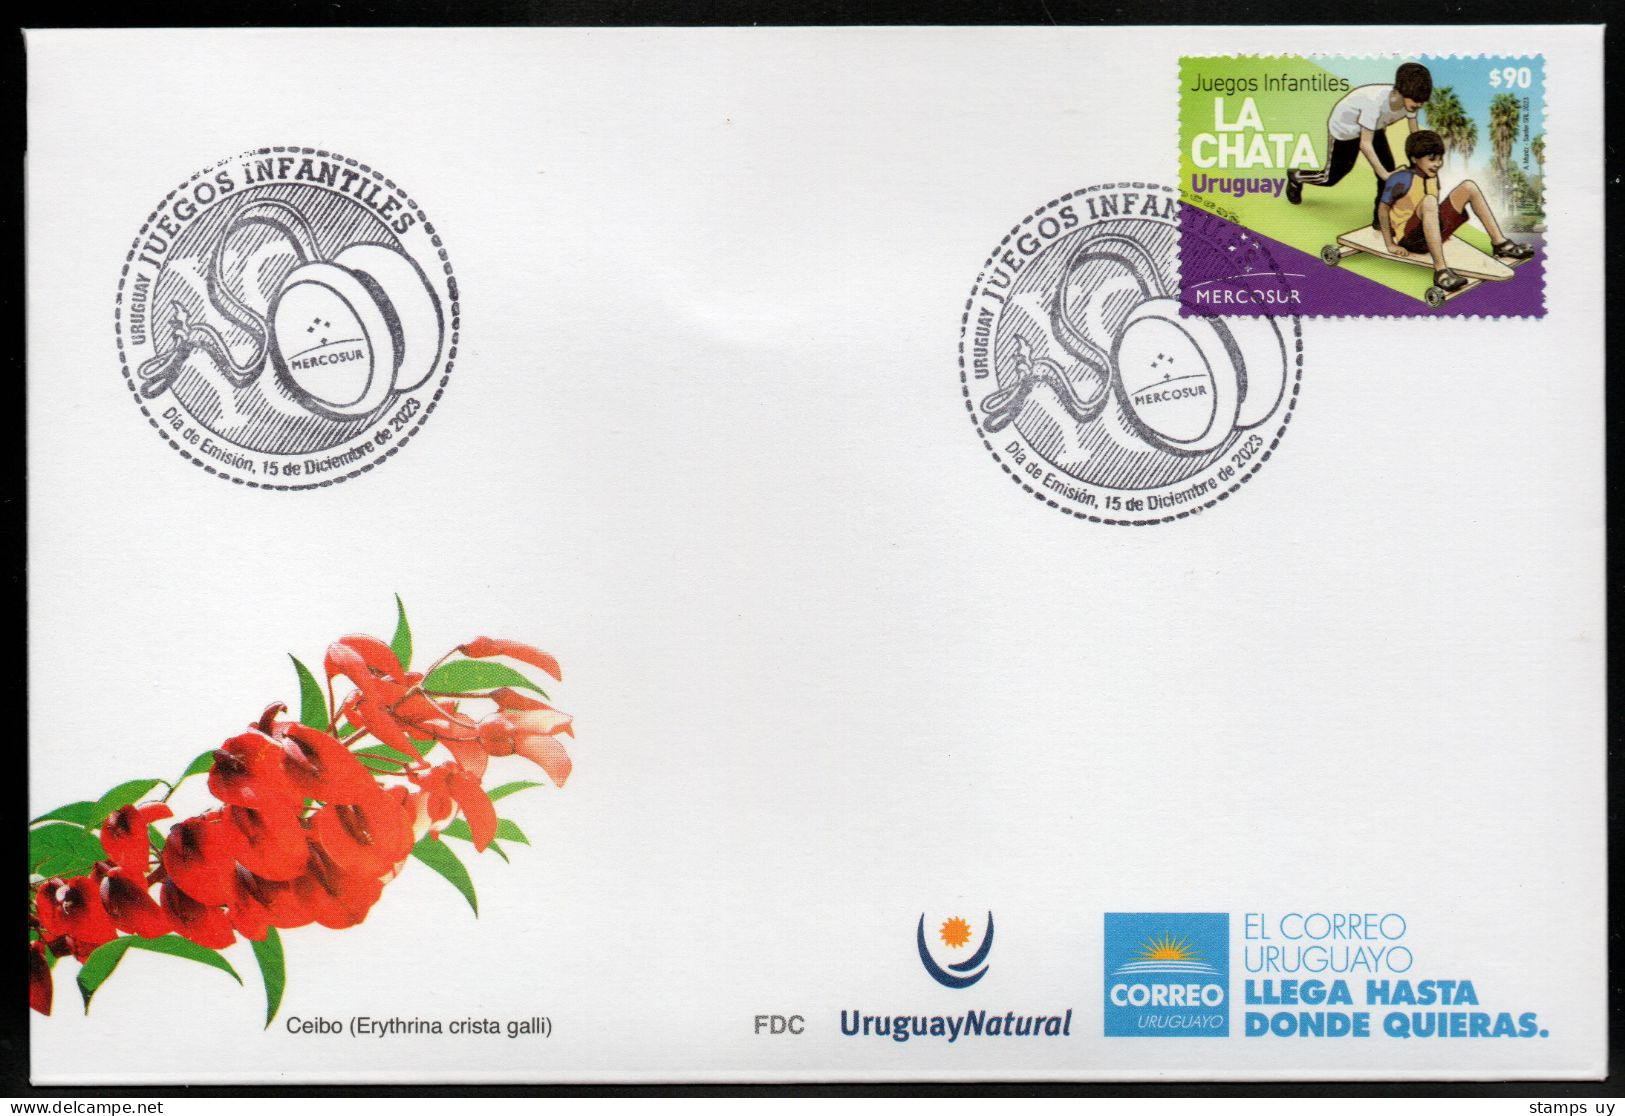 URUGUAY 2023 (Joint Issue, Mercosur, Games, Children, Toys, Wooden Cart, YoYo, Ruleman, Palm, Tree, Crux, Stars) - 1 FDC - Other (Earth)